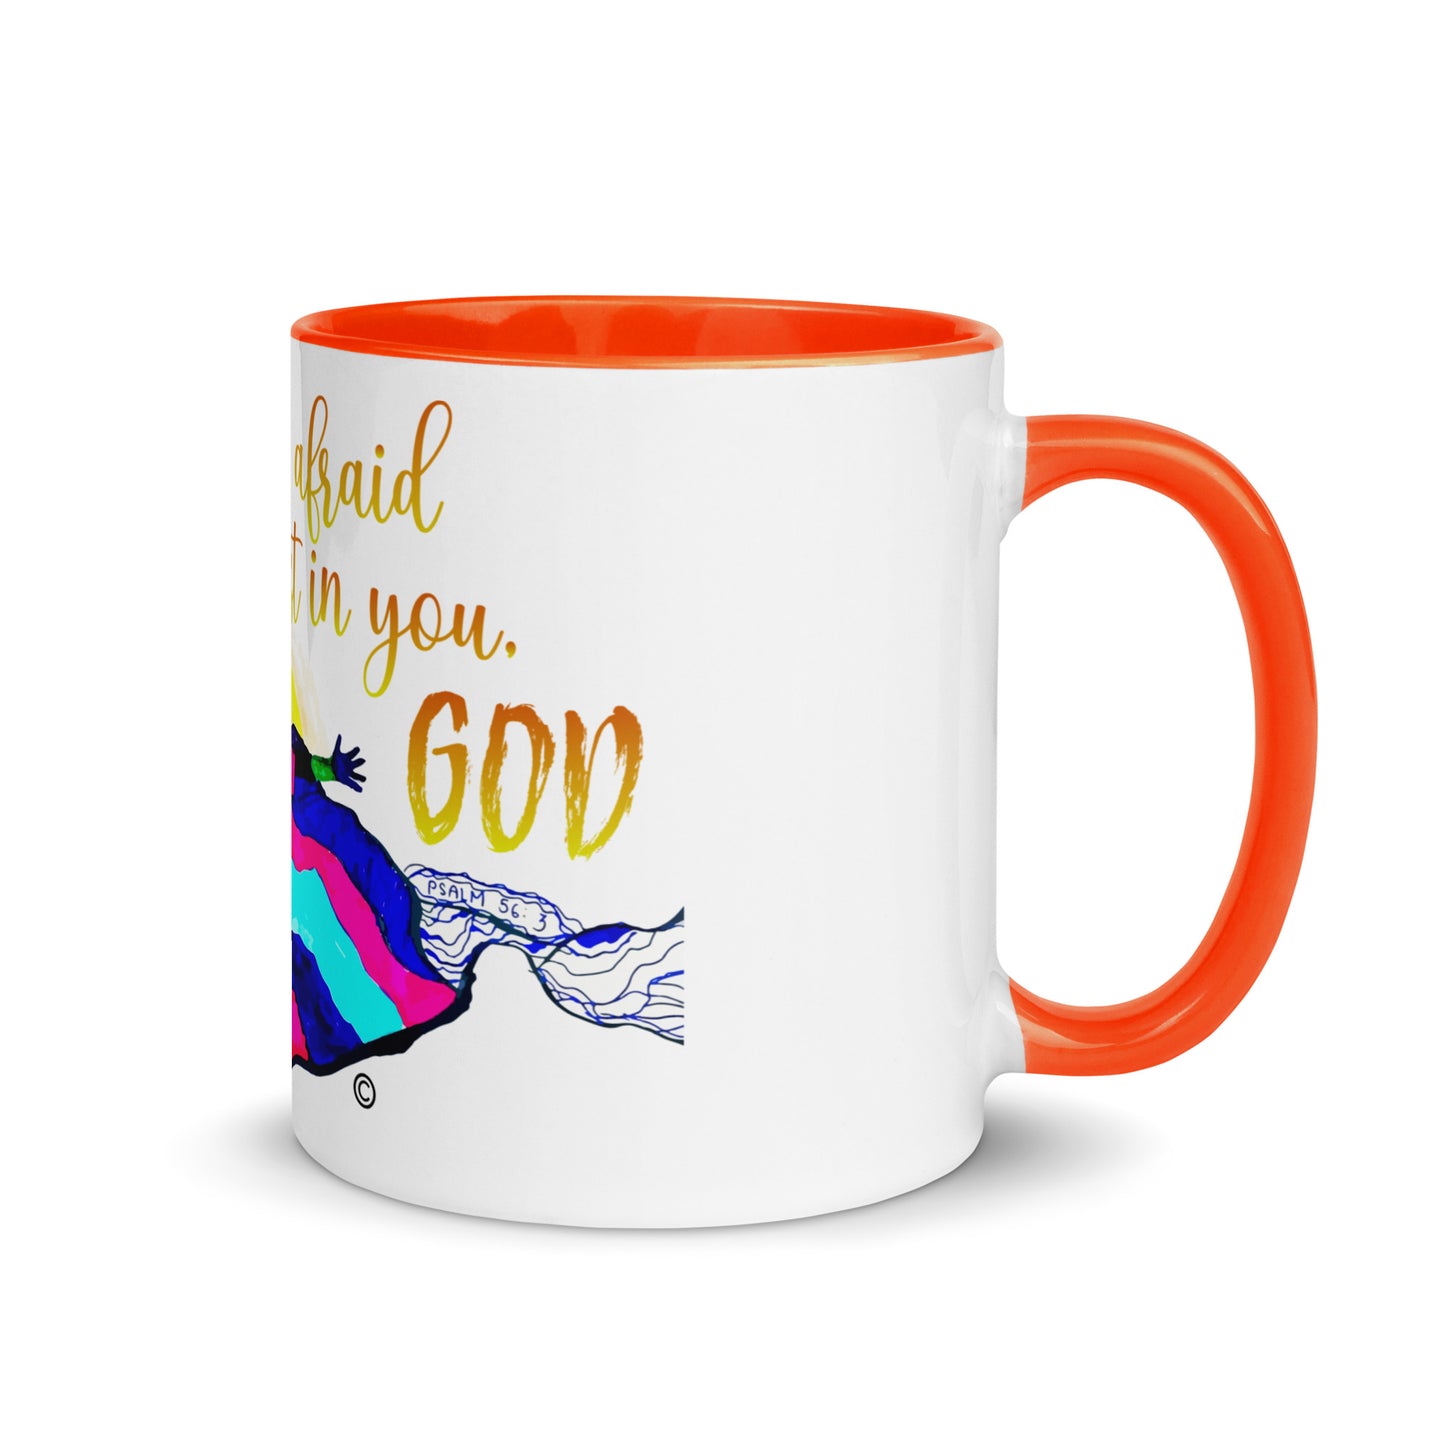 I Put My Trust in You Mug with Color Inside